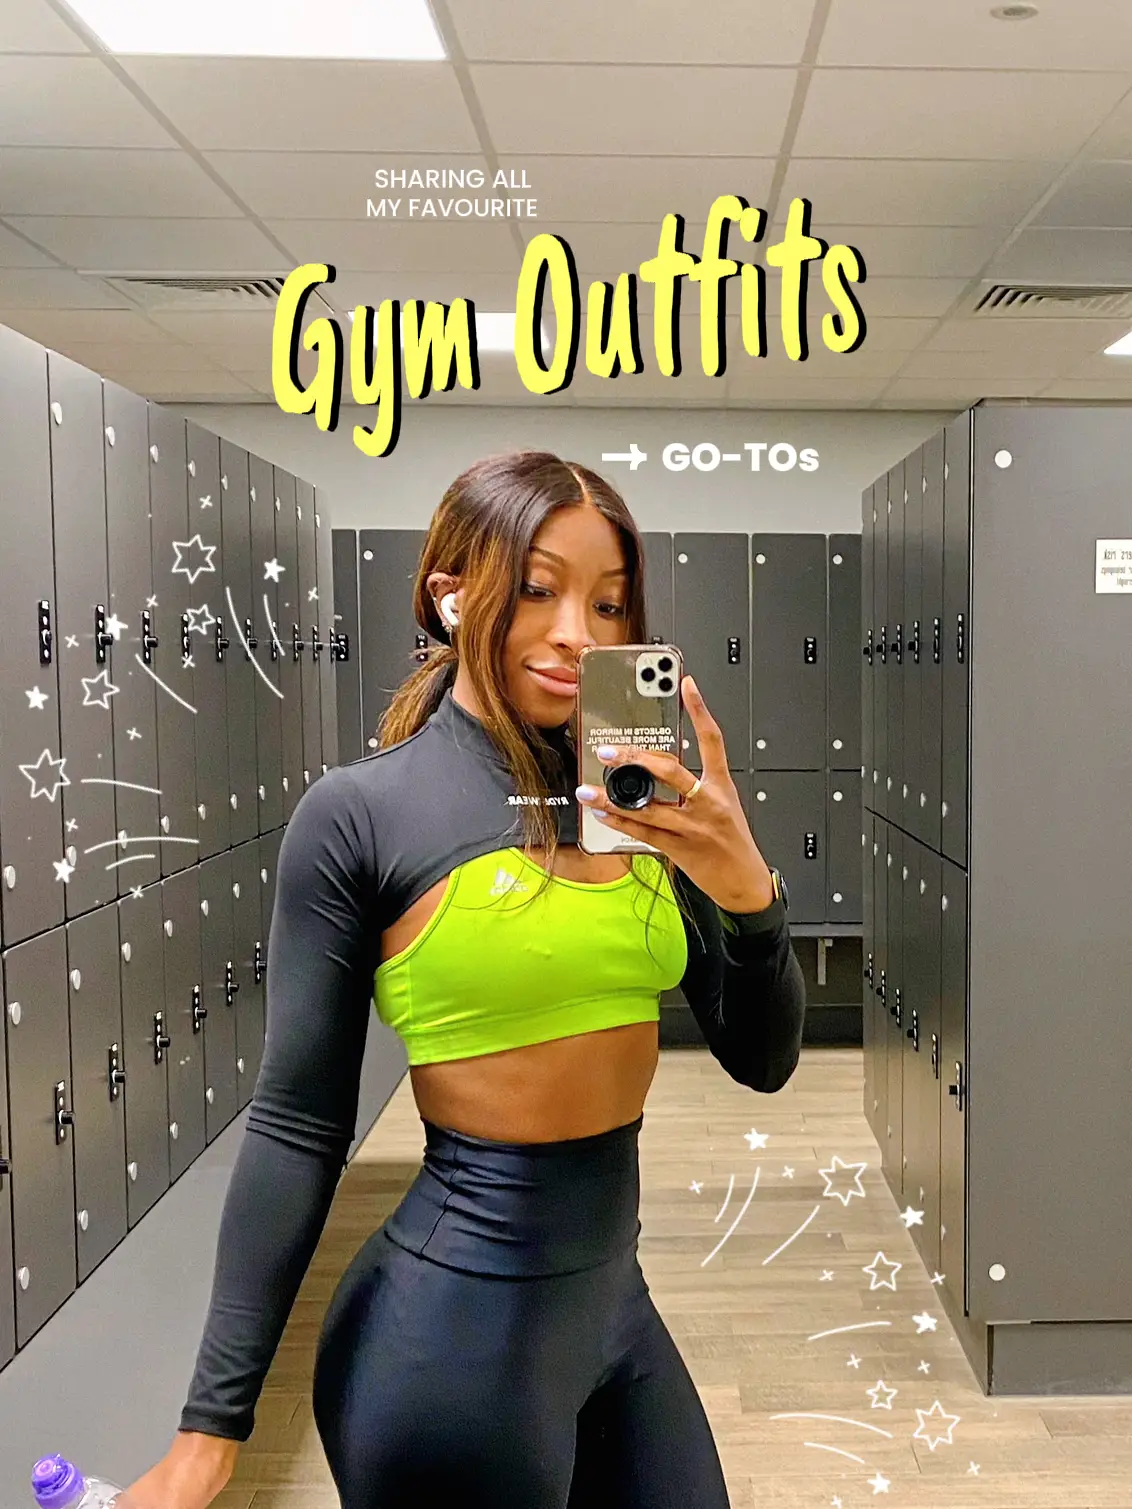 Favorite gym outfits/brands 💪🏼